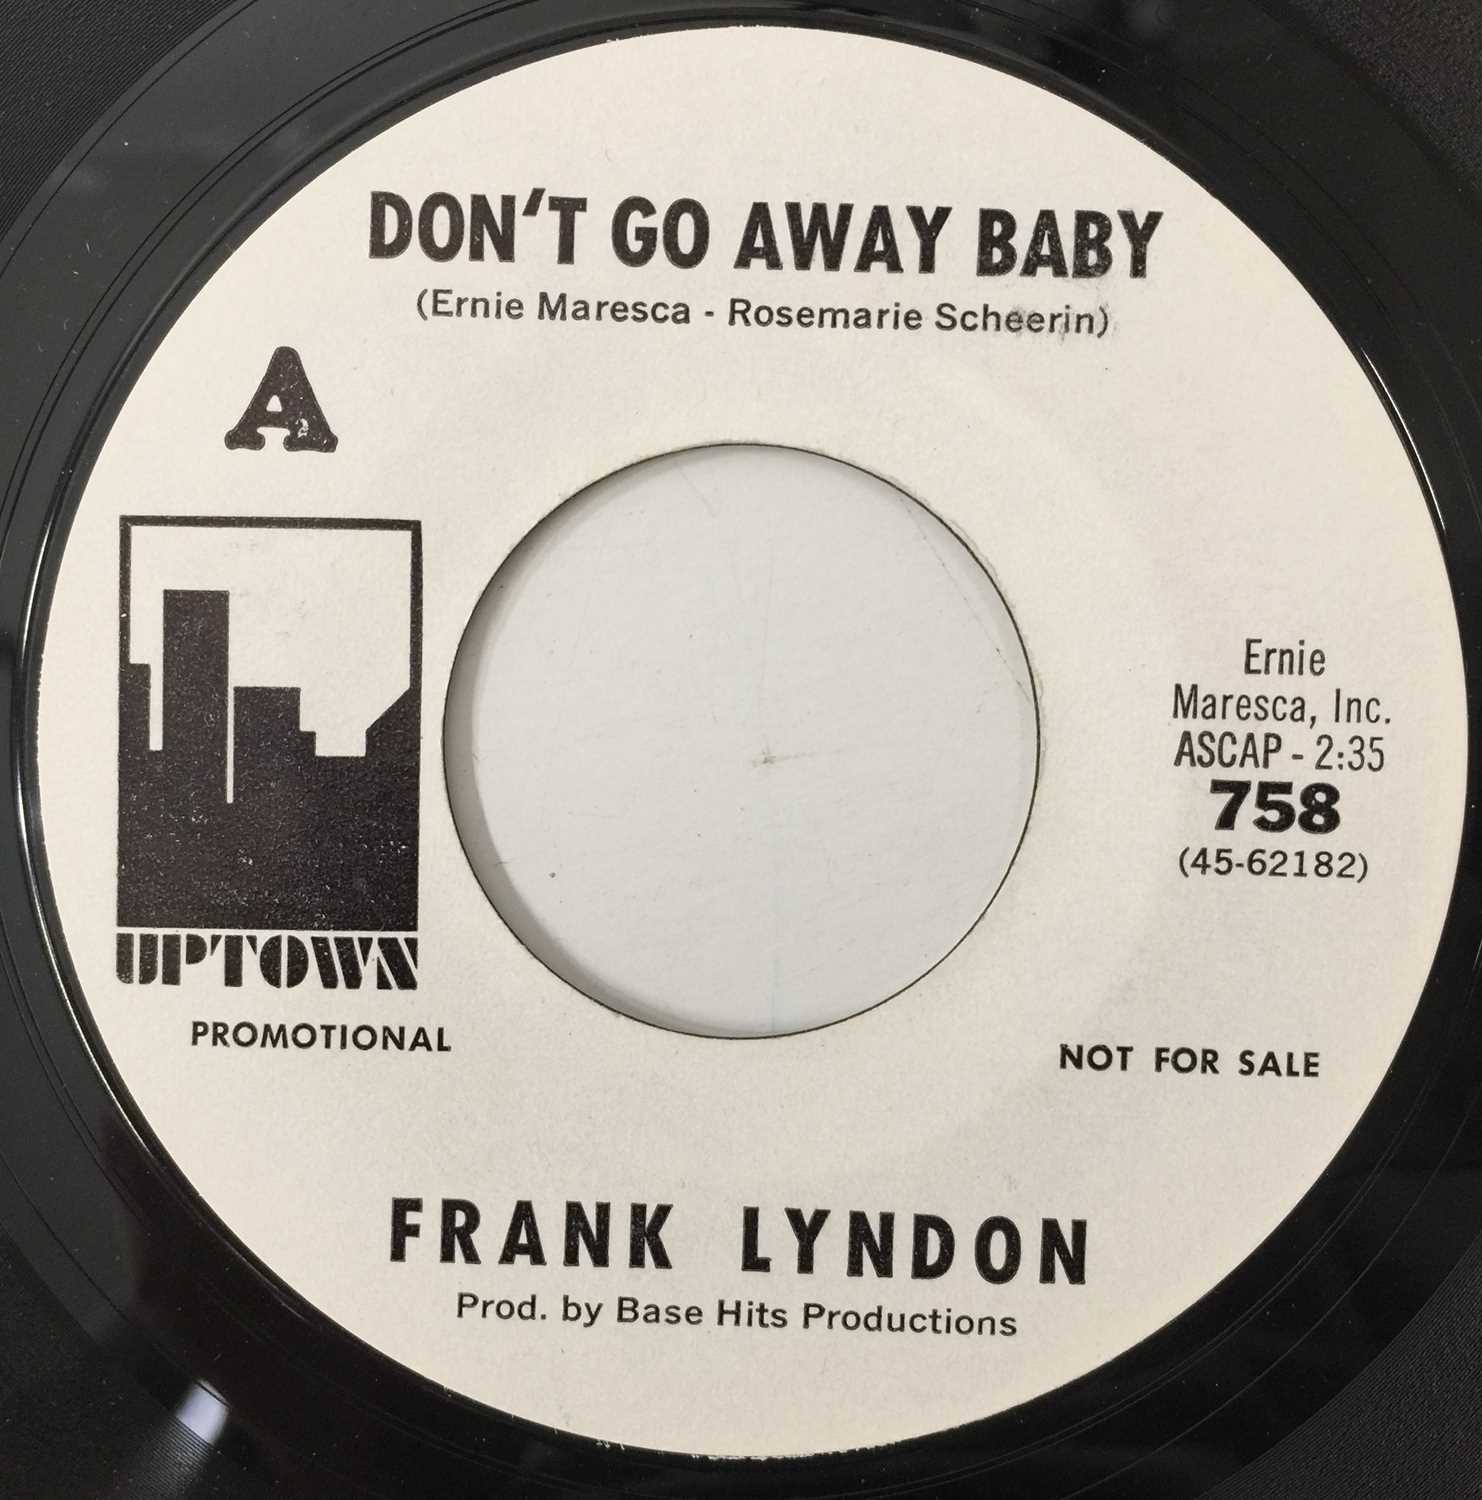 FRANK LYNDON - DON'T GO AWAY BABY 7" (PROMO - UPTOWN 758) - Image 2 of 3